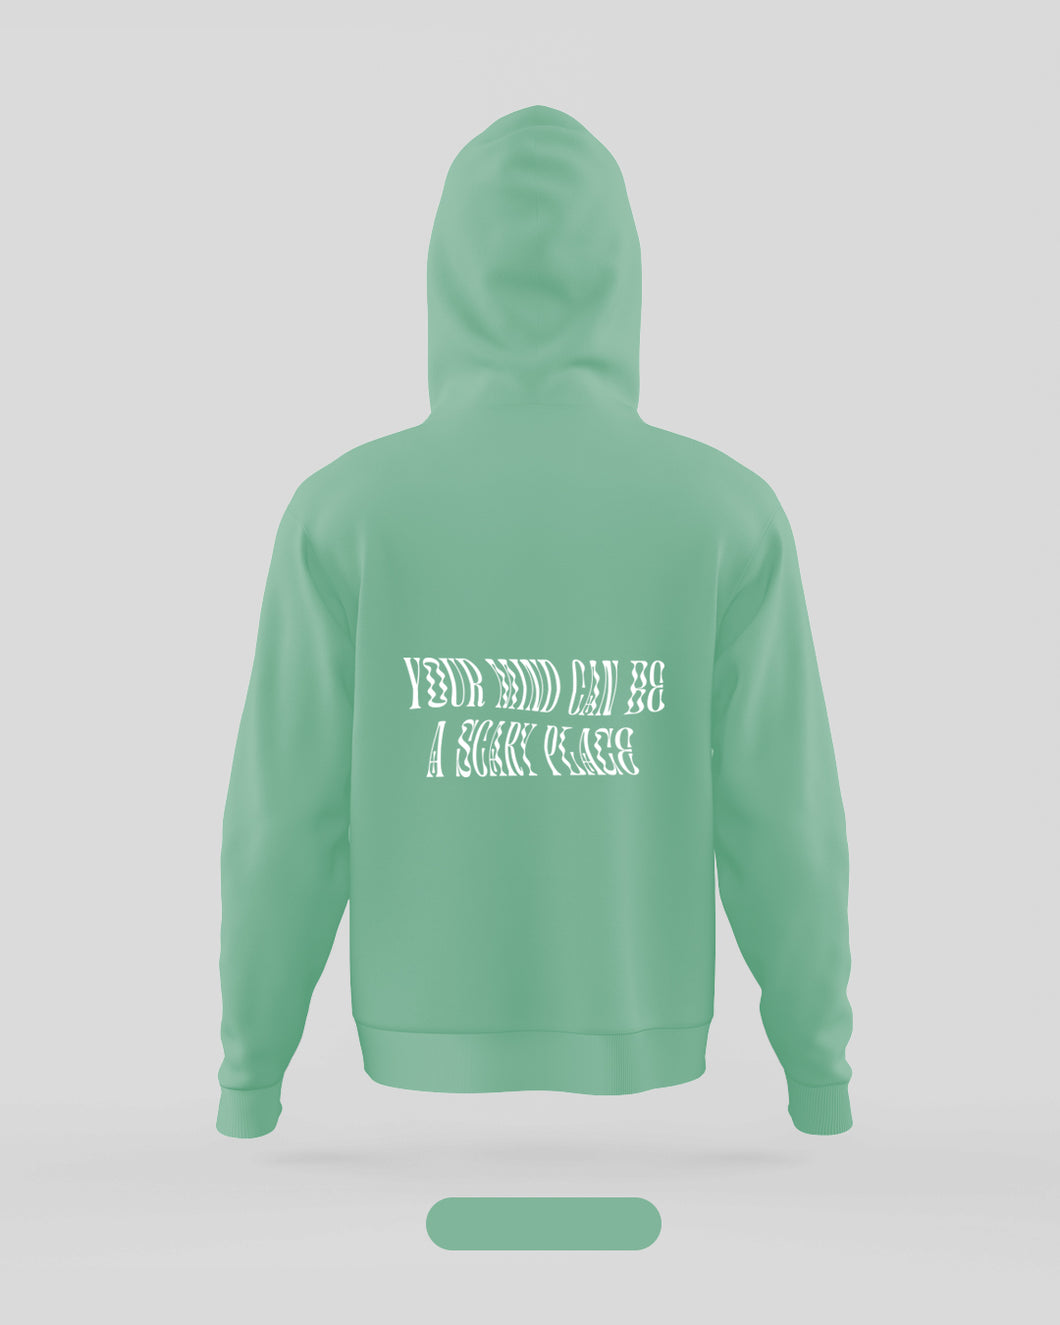 Your Mind Can Be A Scary Place Mint Hoodie by Cut Paste Build